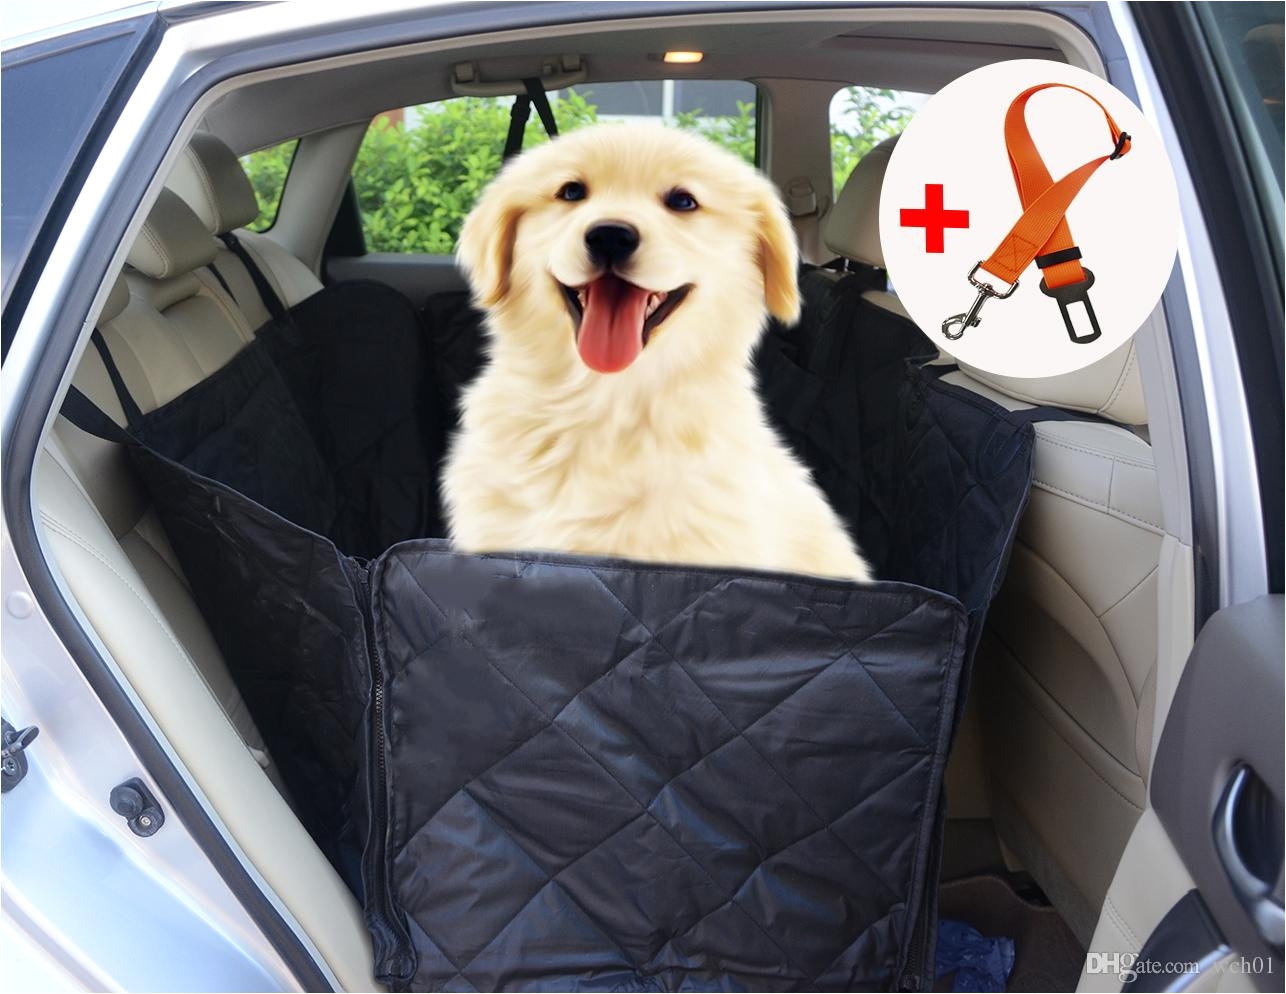 2018 car pet seat cover for large dogs breeds waterproof washable nonslip scratch pets seat protectors hammock for car trucks suvs vans vehicles from wch01